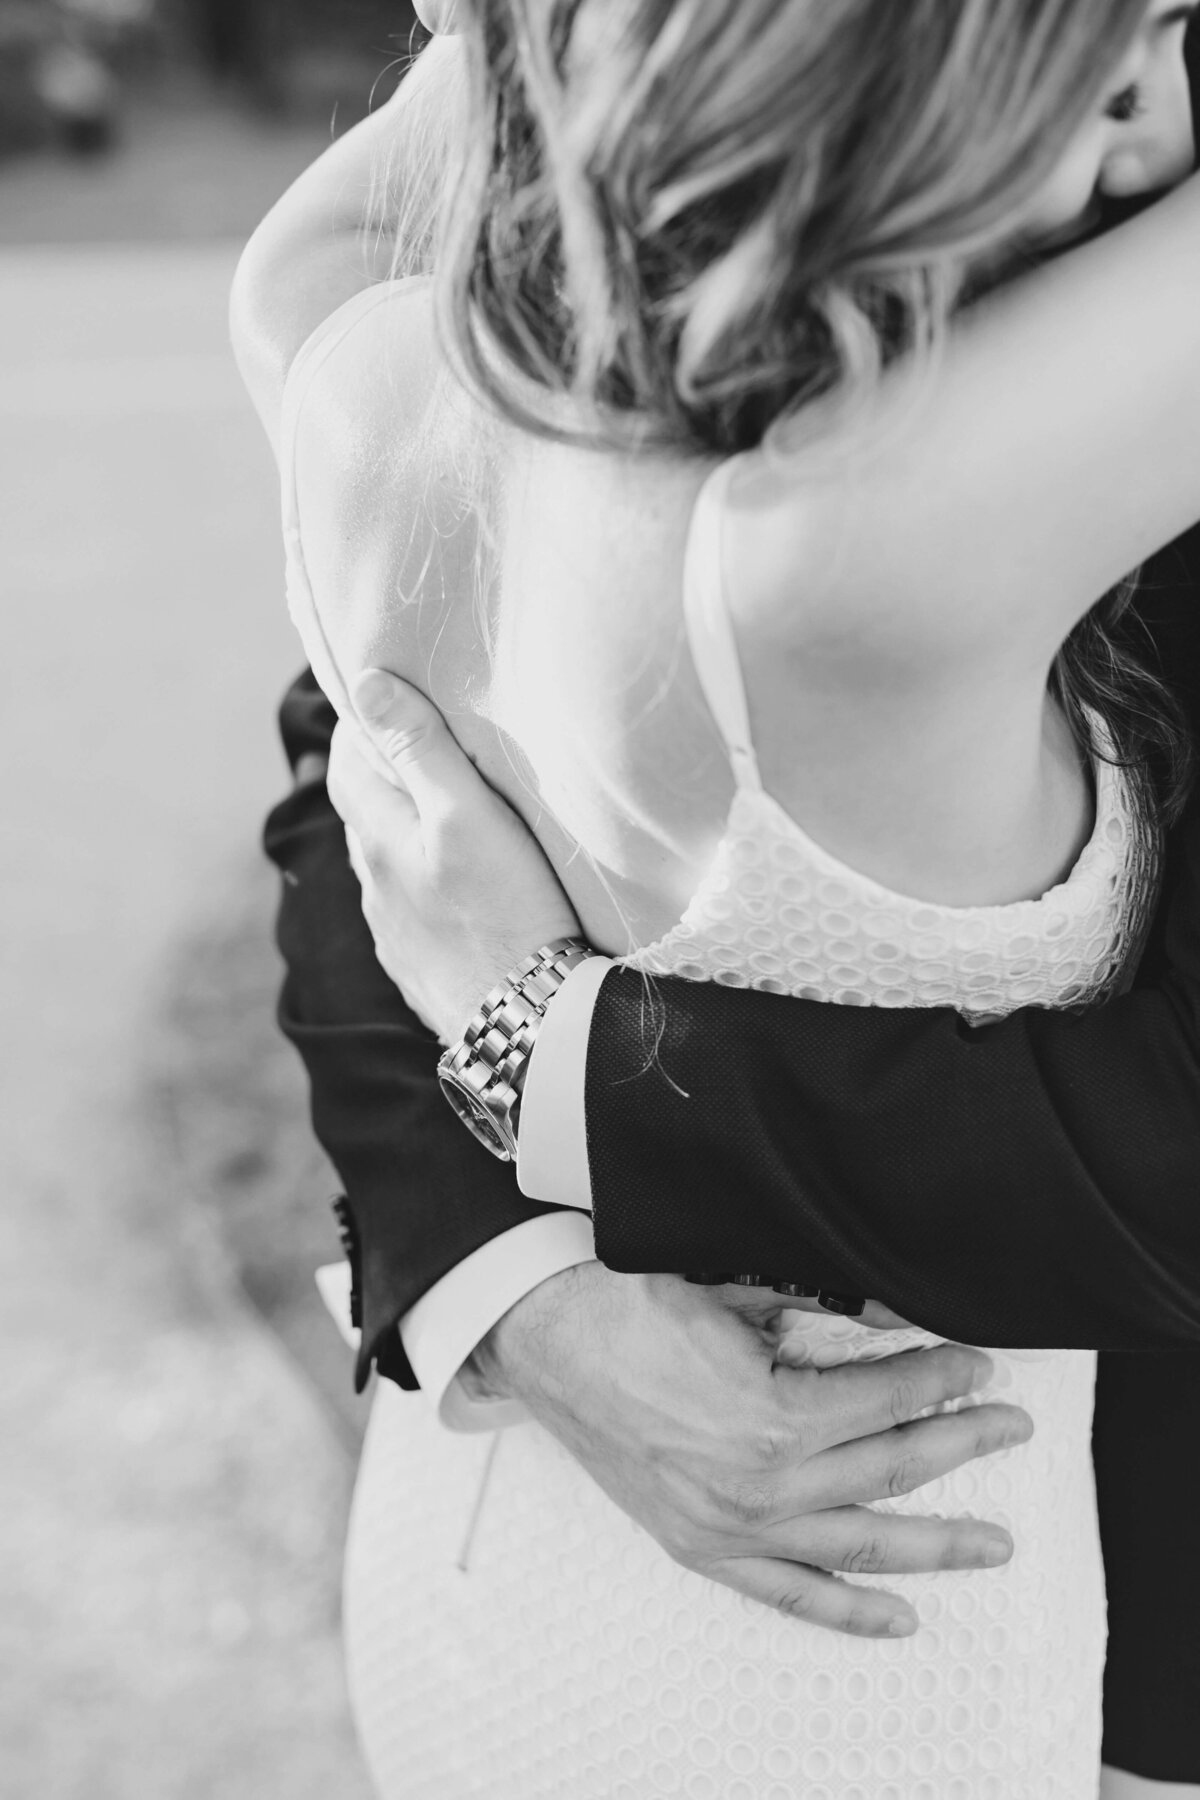 Black and white closeup of a couple embracing